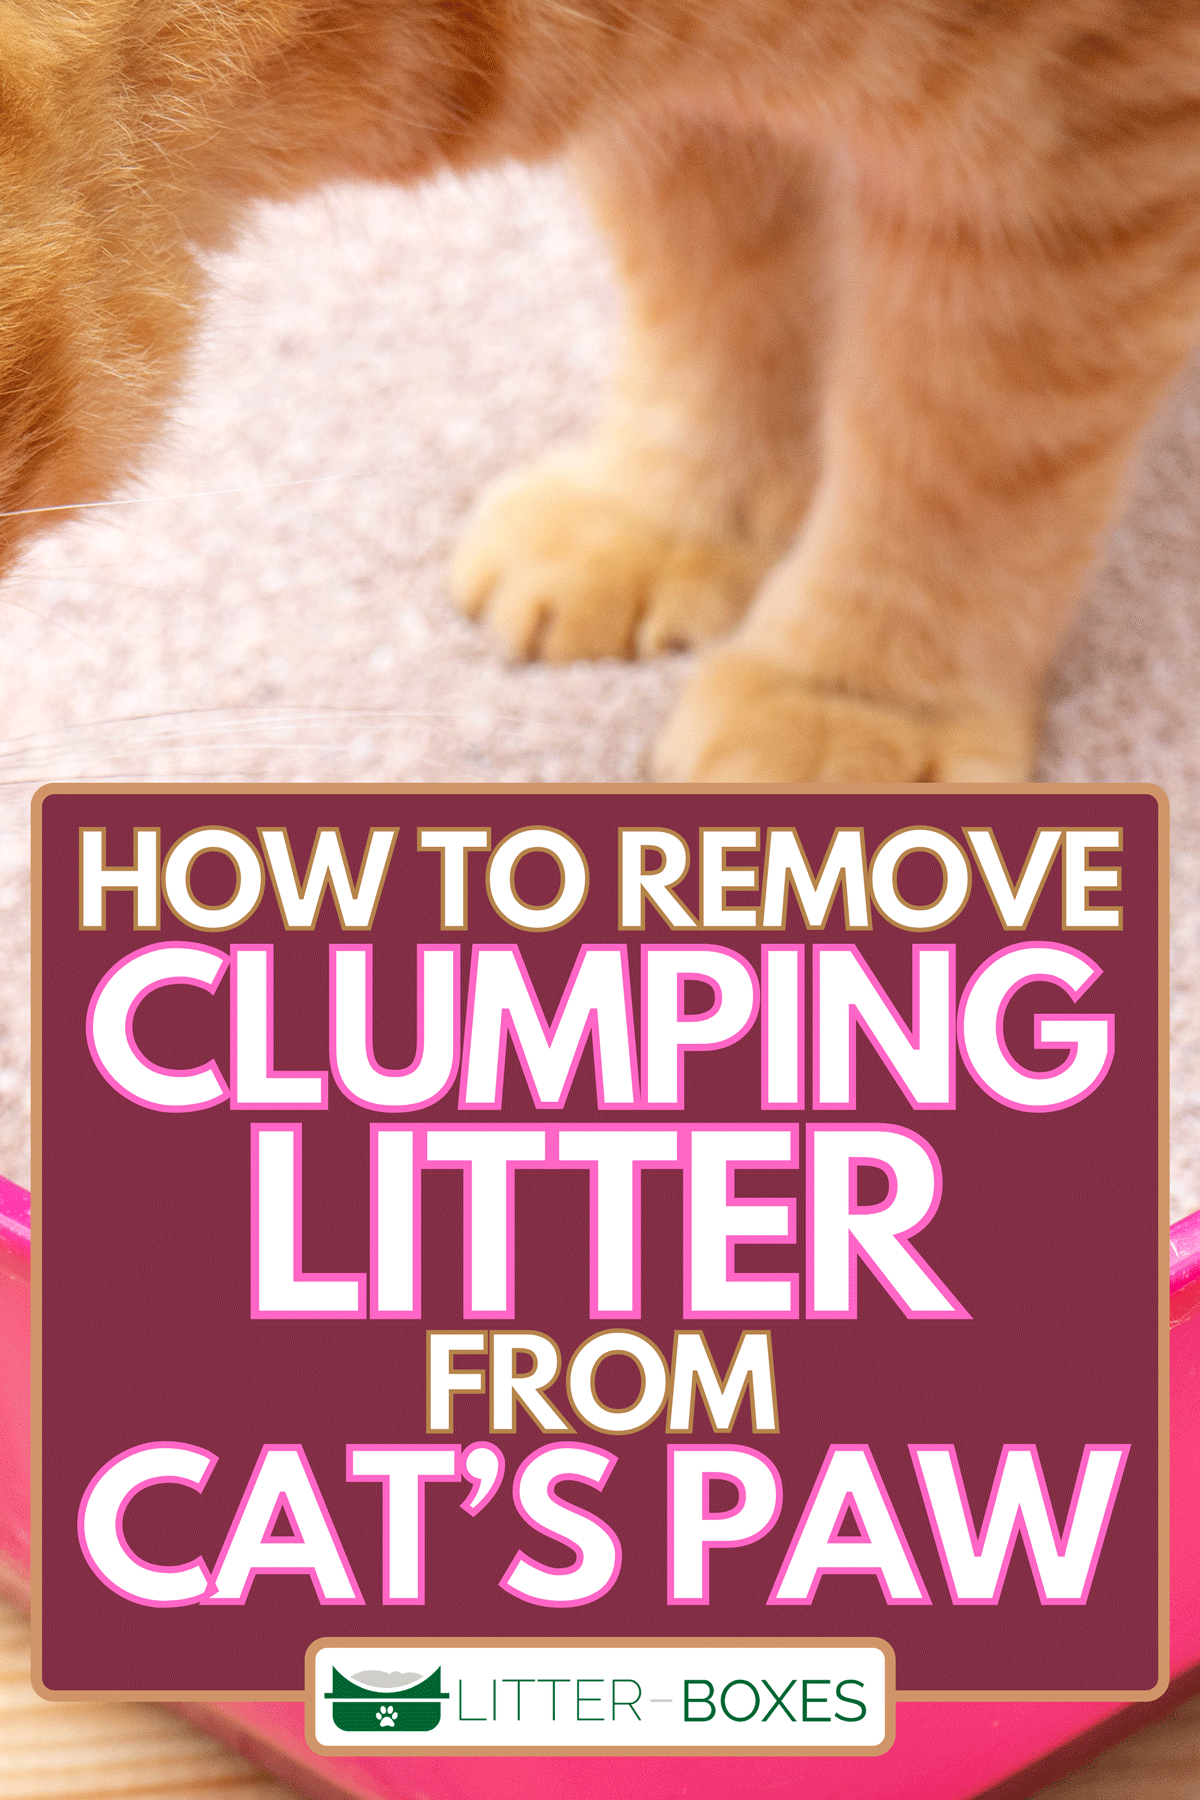 How to Get Clumped Litter Out of Paws?